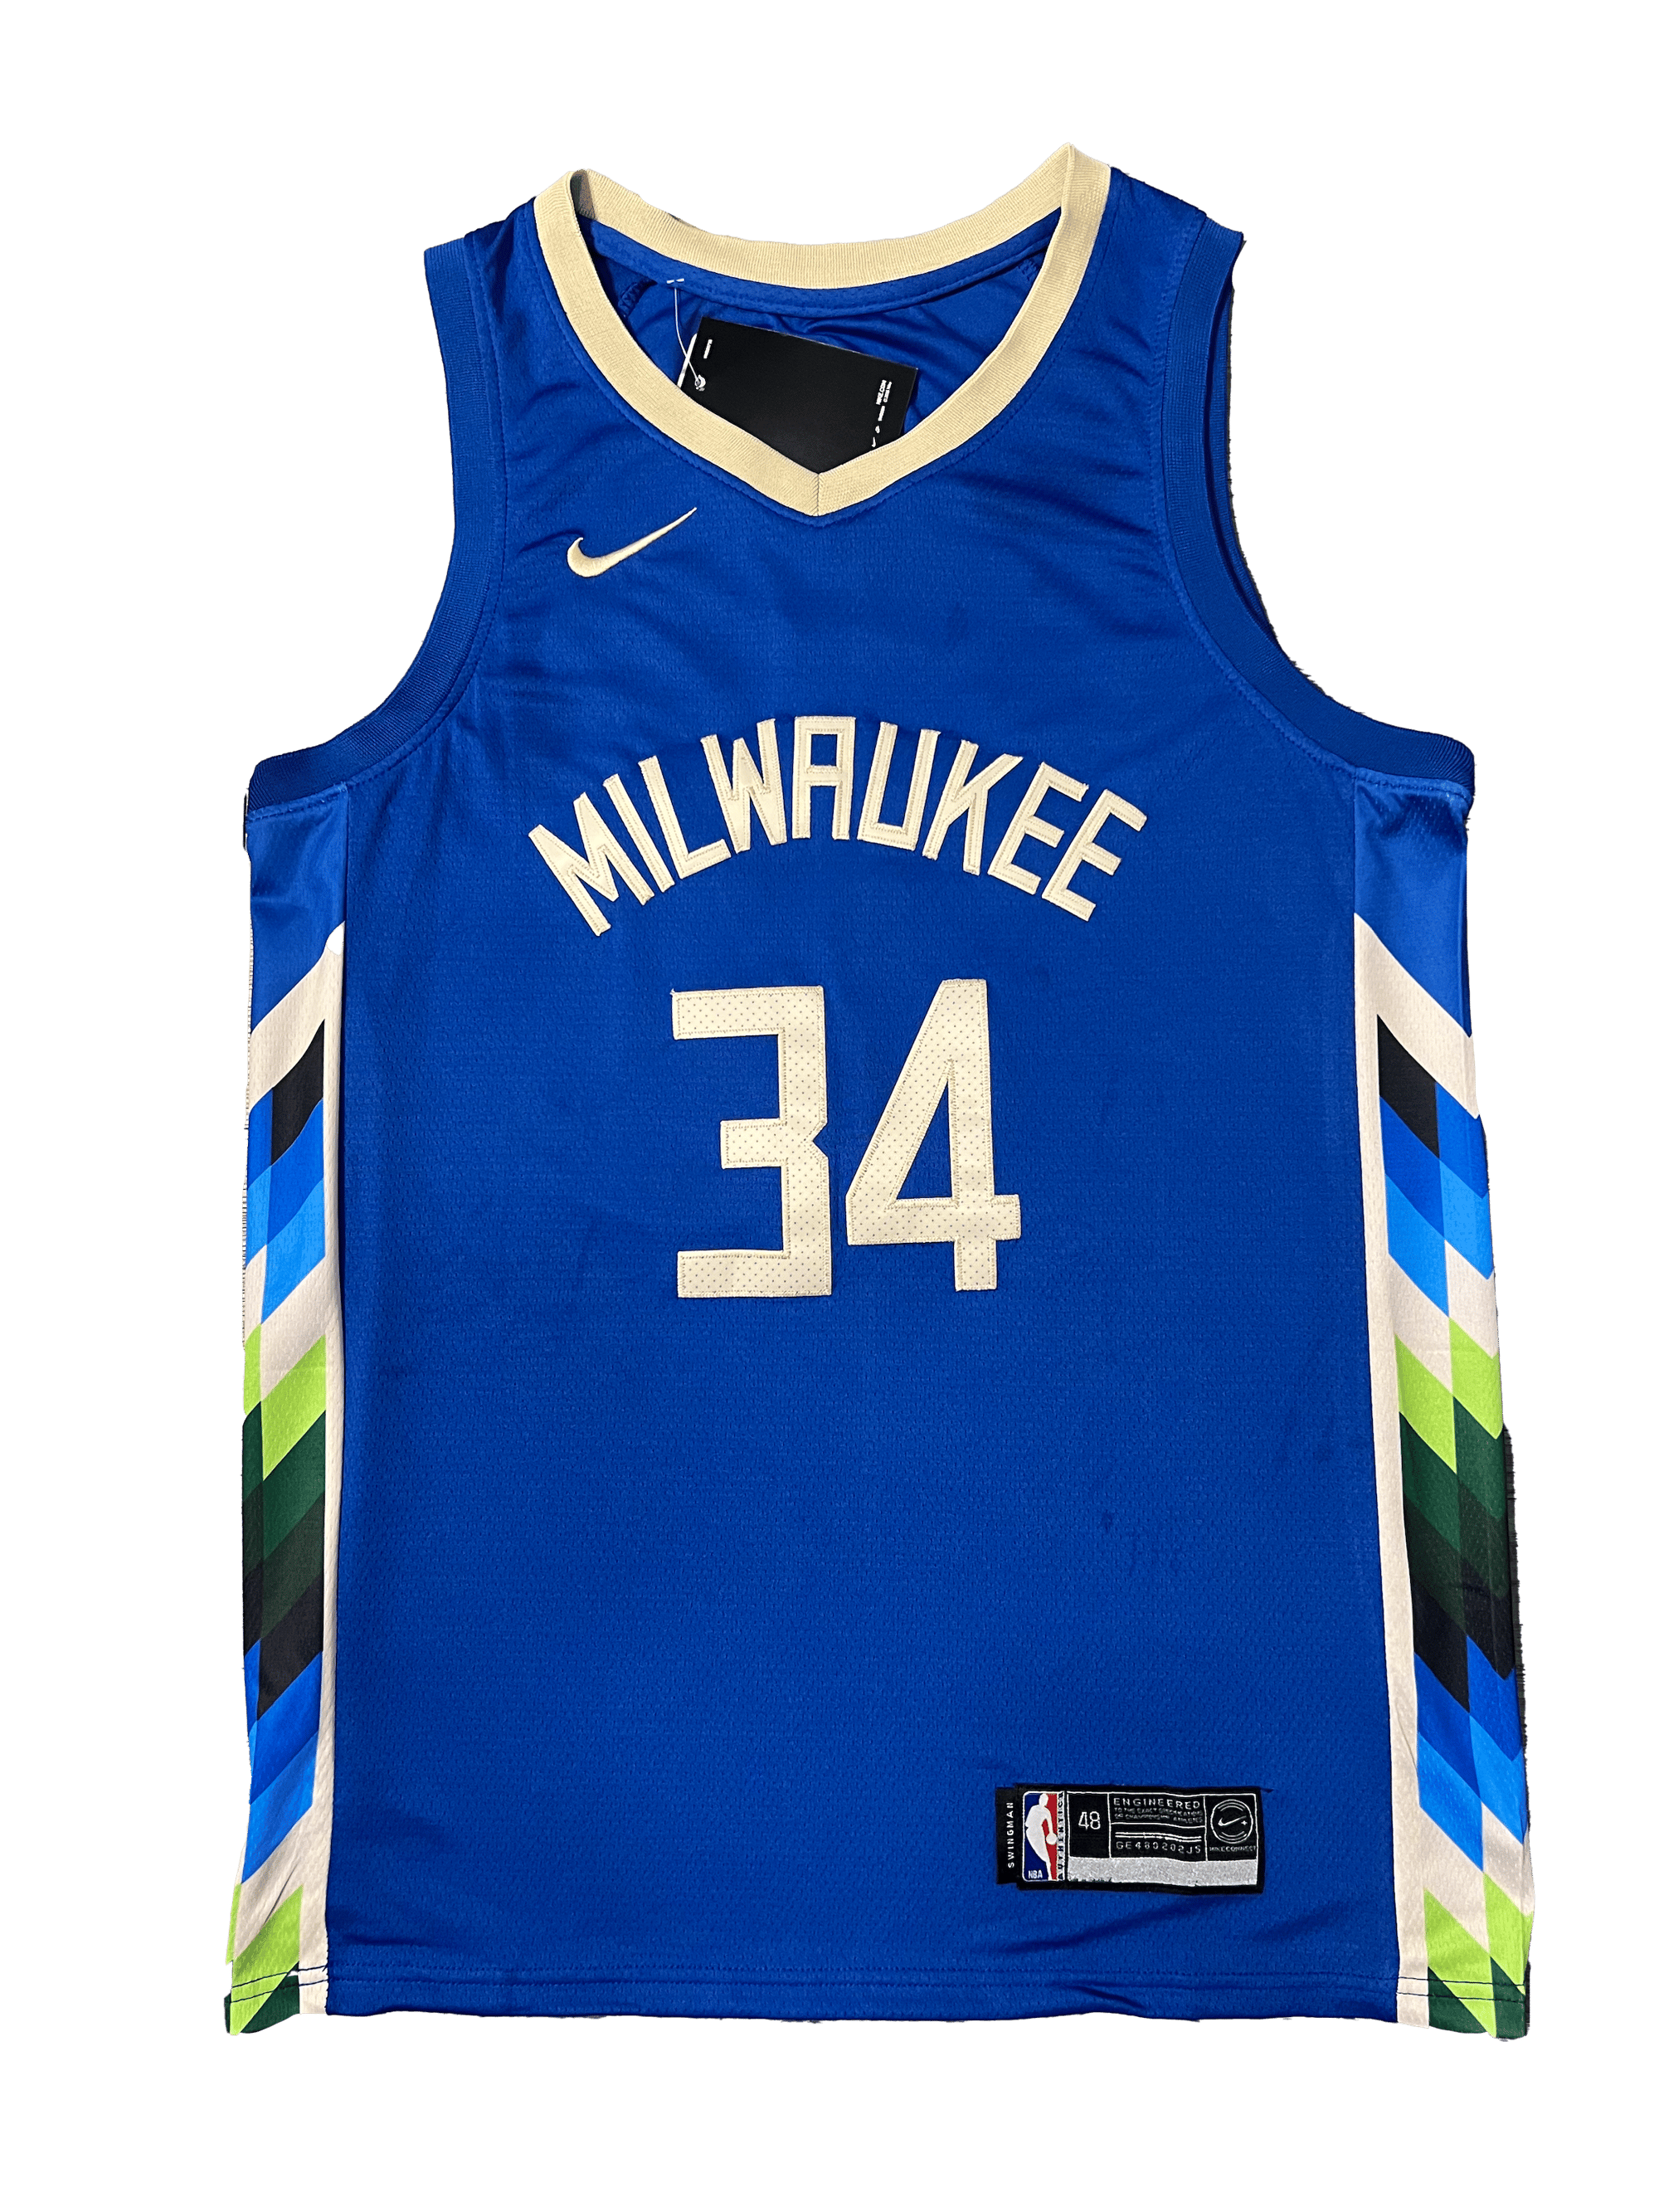 giannis stitched jersey